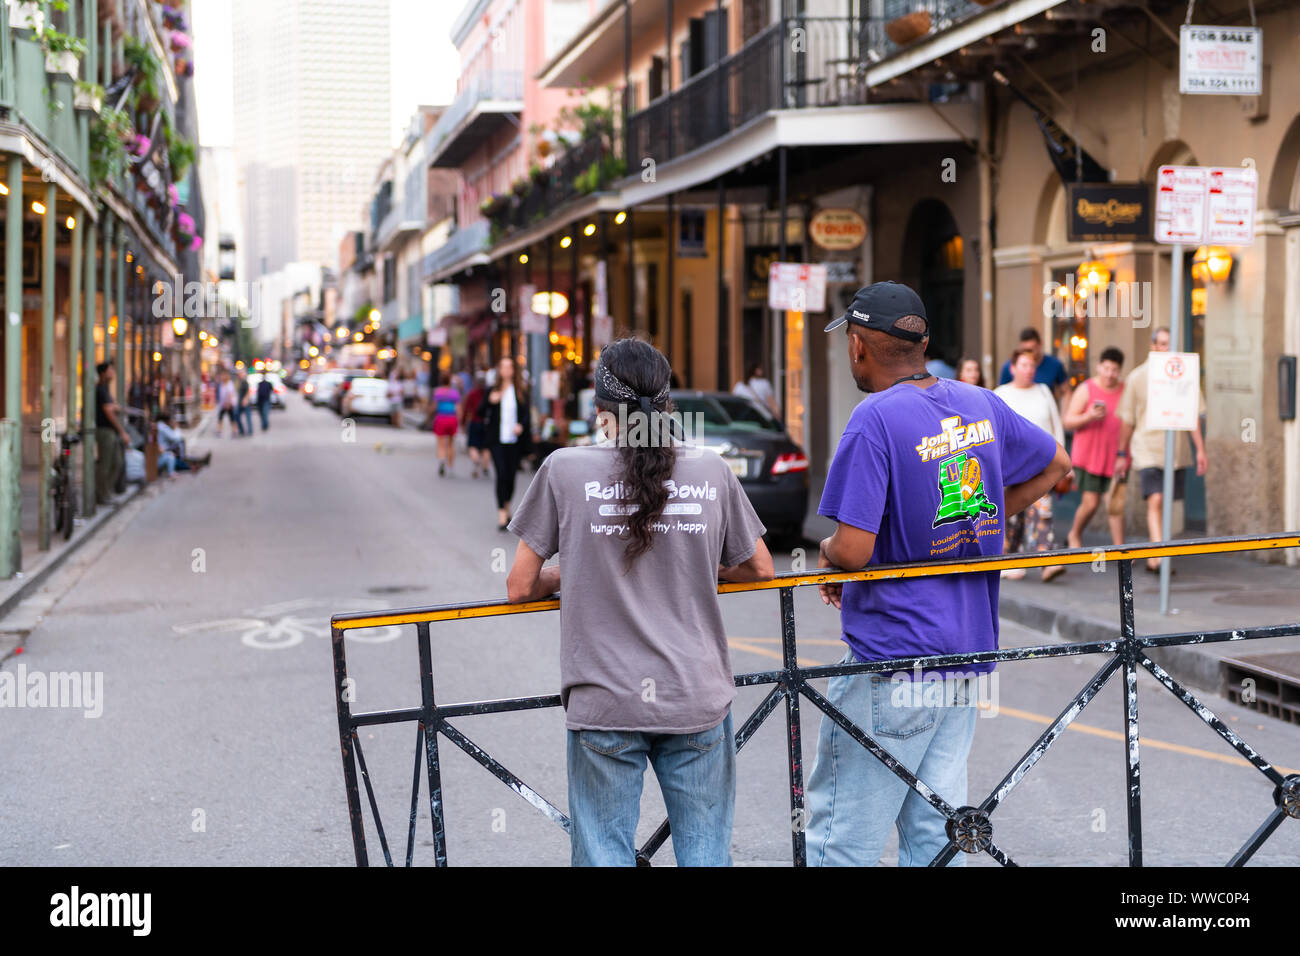 New Orleans, USA - April 22, 2018: Back of two local men standing on Bourbon street road in evening with people walking in blurry background of Louisi Stock Photo